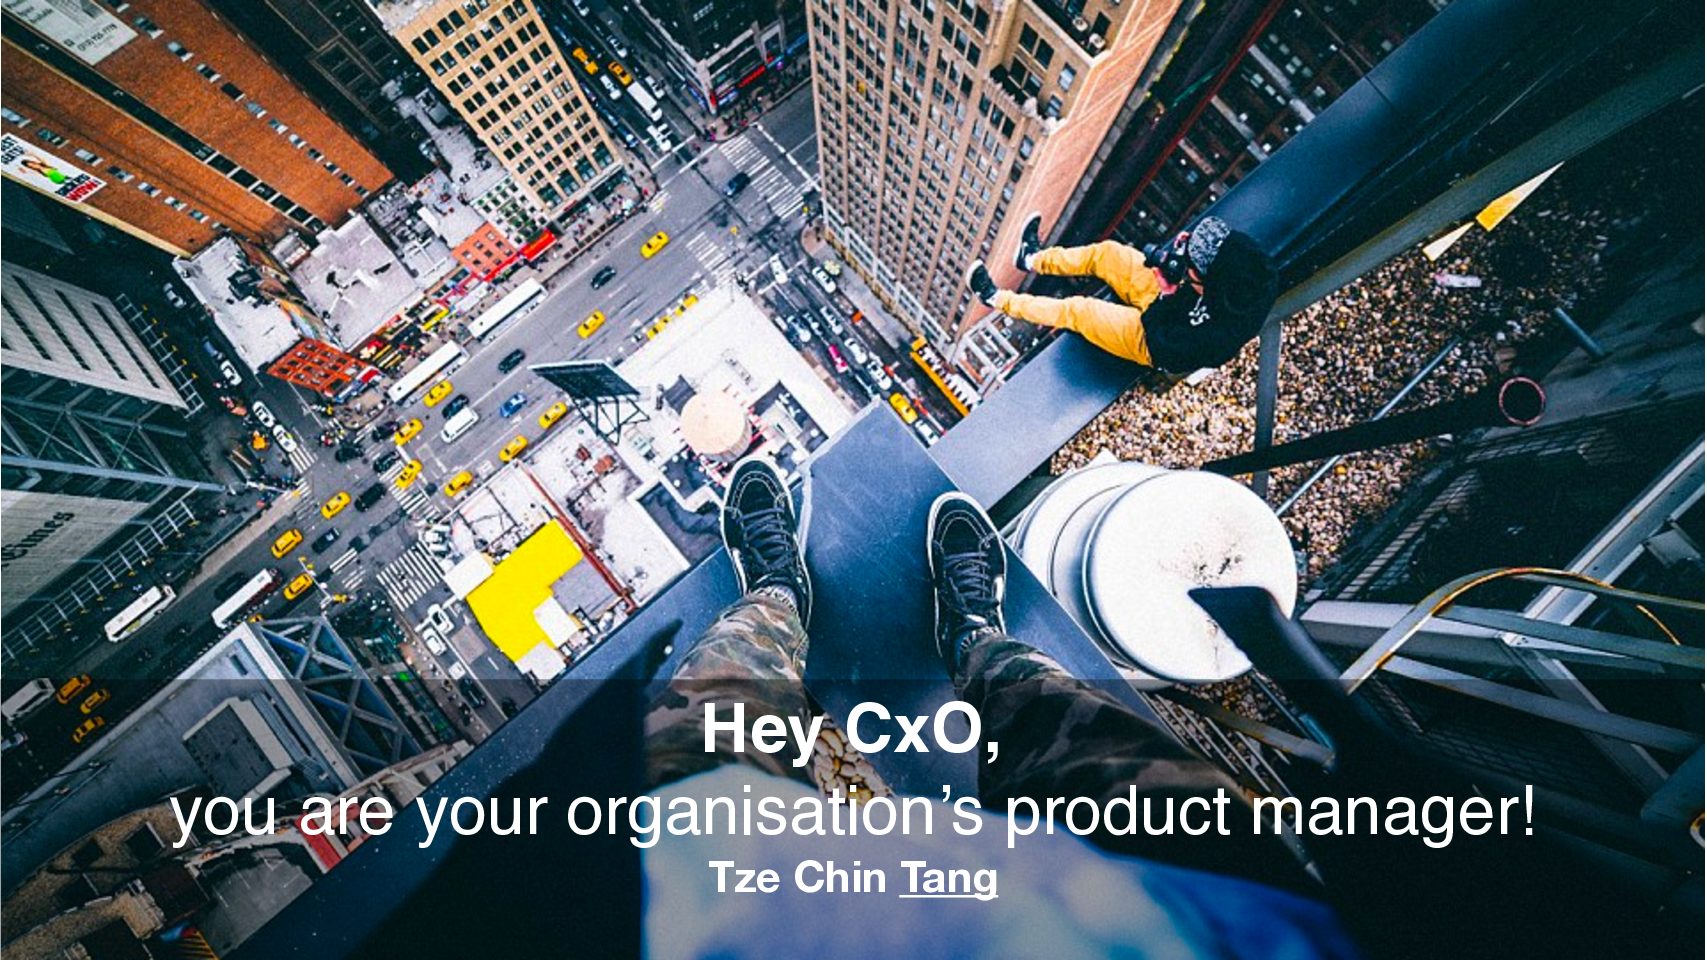 CxO: You are Your Organisation's Product Manager